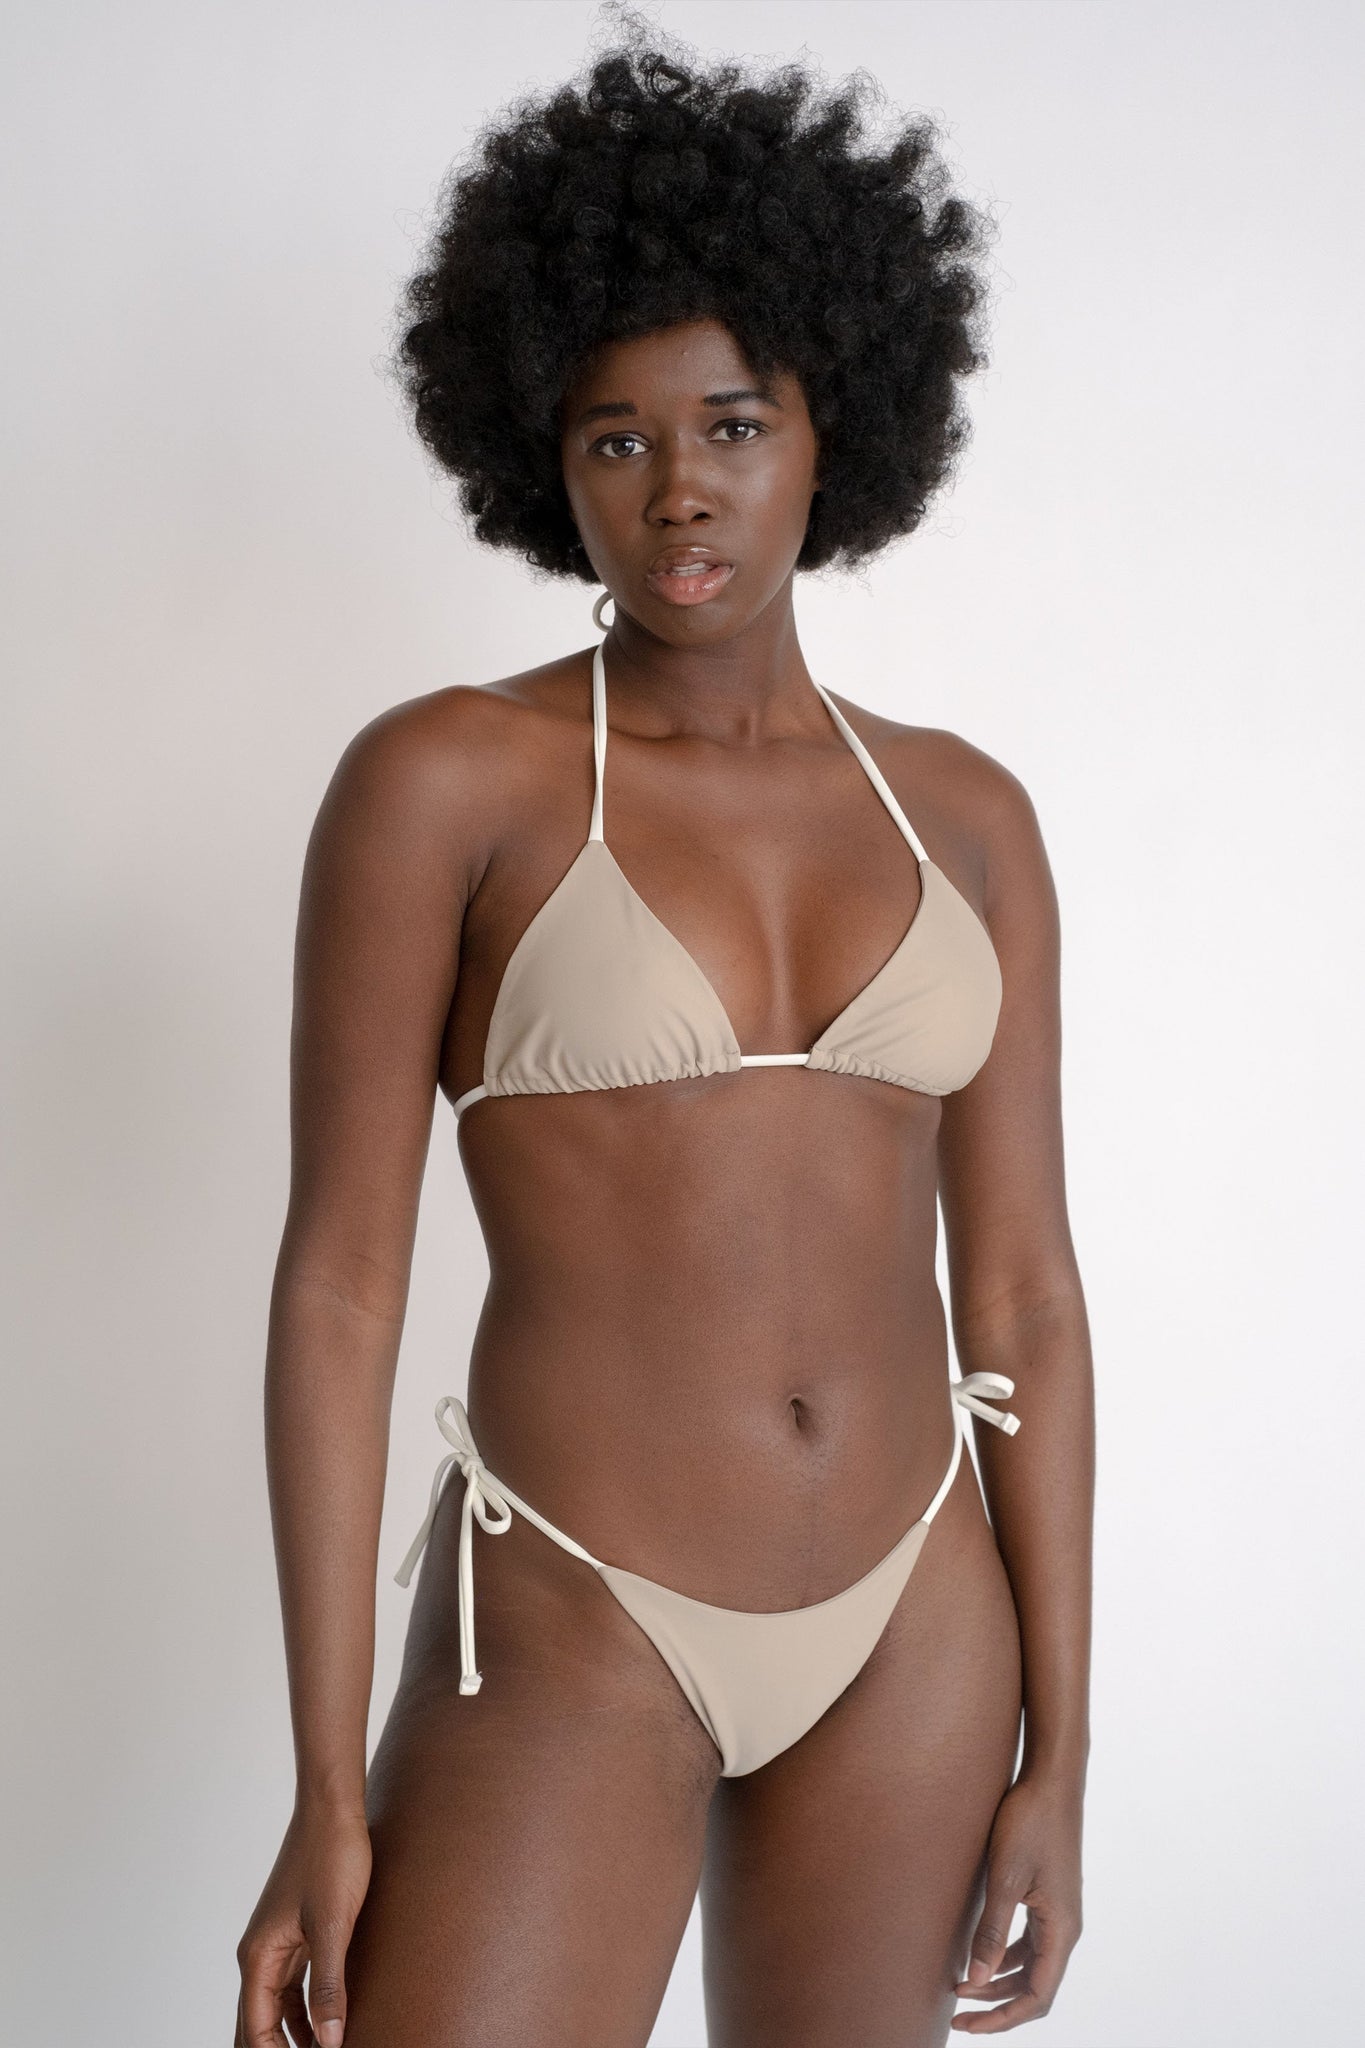 A woman standing with her arms relaxed by her sides wearing nude triangle bikini bottoms with adjustable white strings and a matching nude triangle bikini top with white adjustable strings.